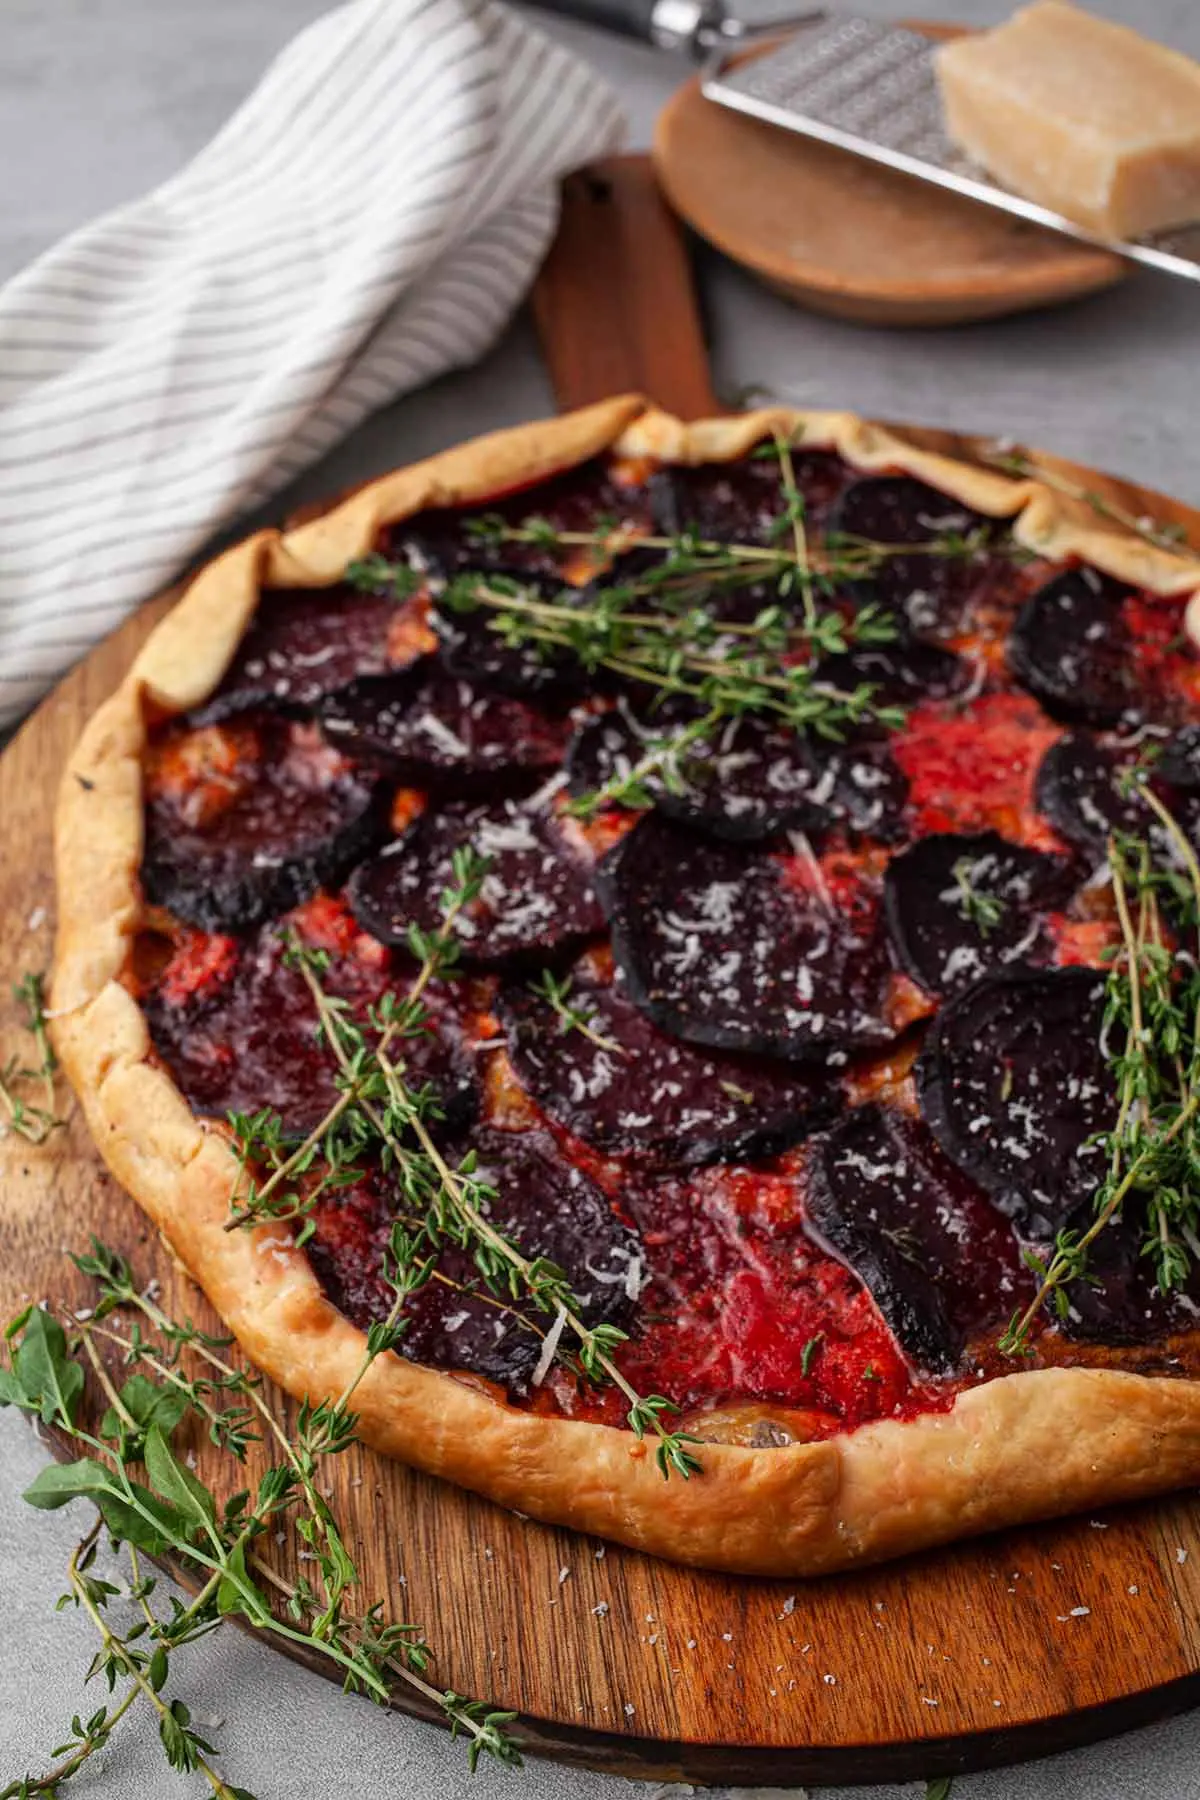 How to Make a Beetroot Galette 